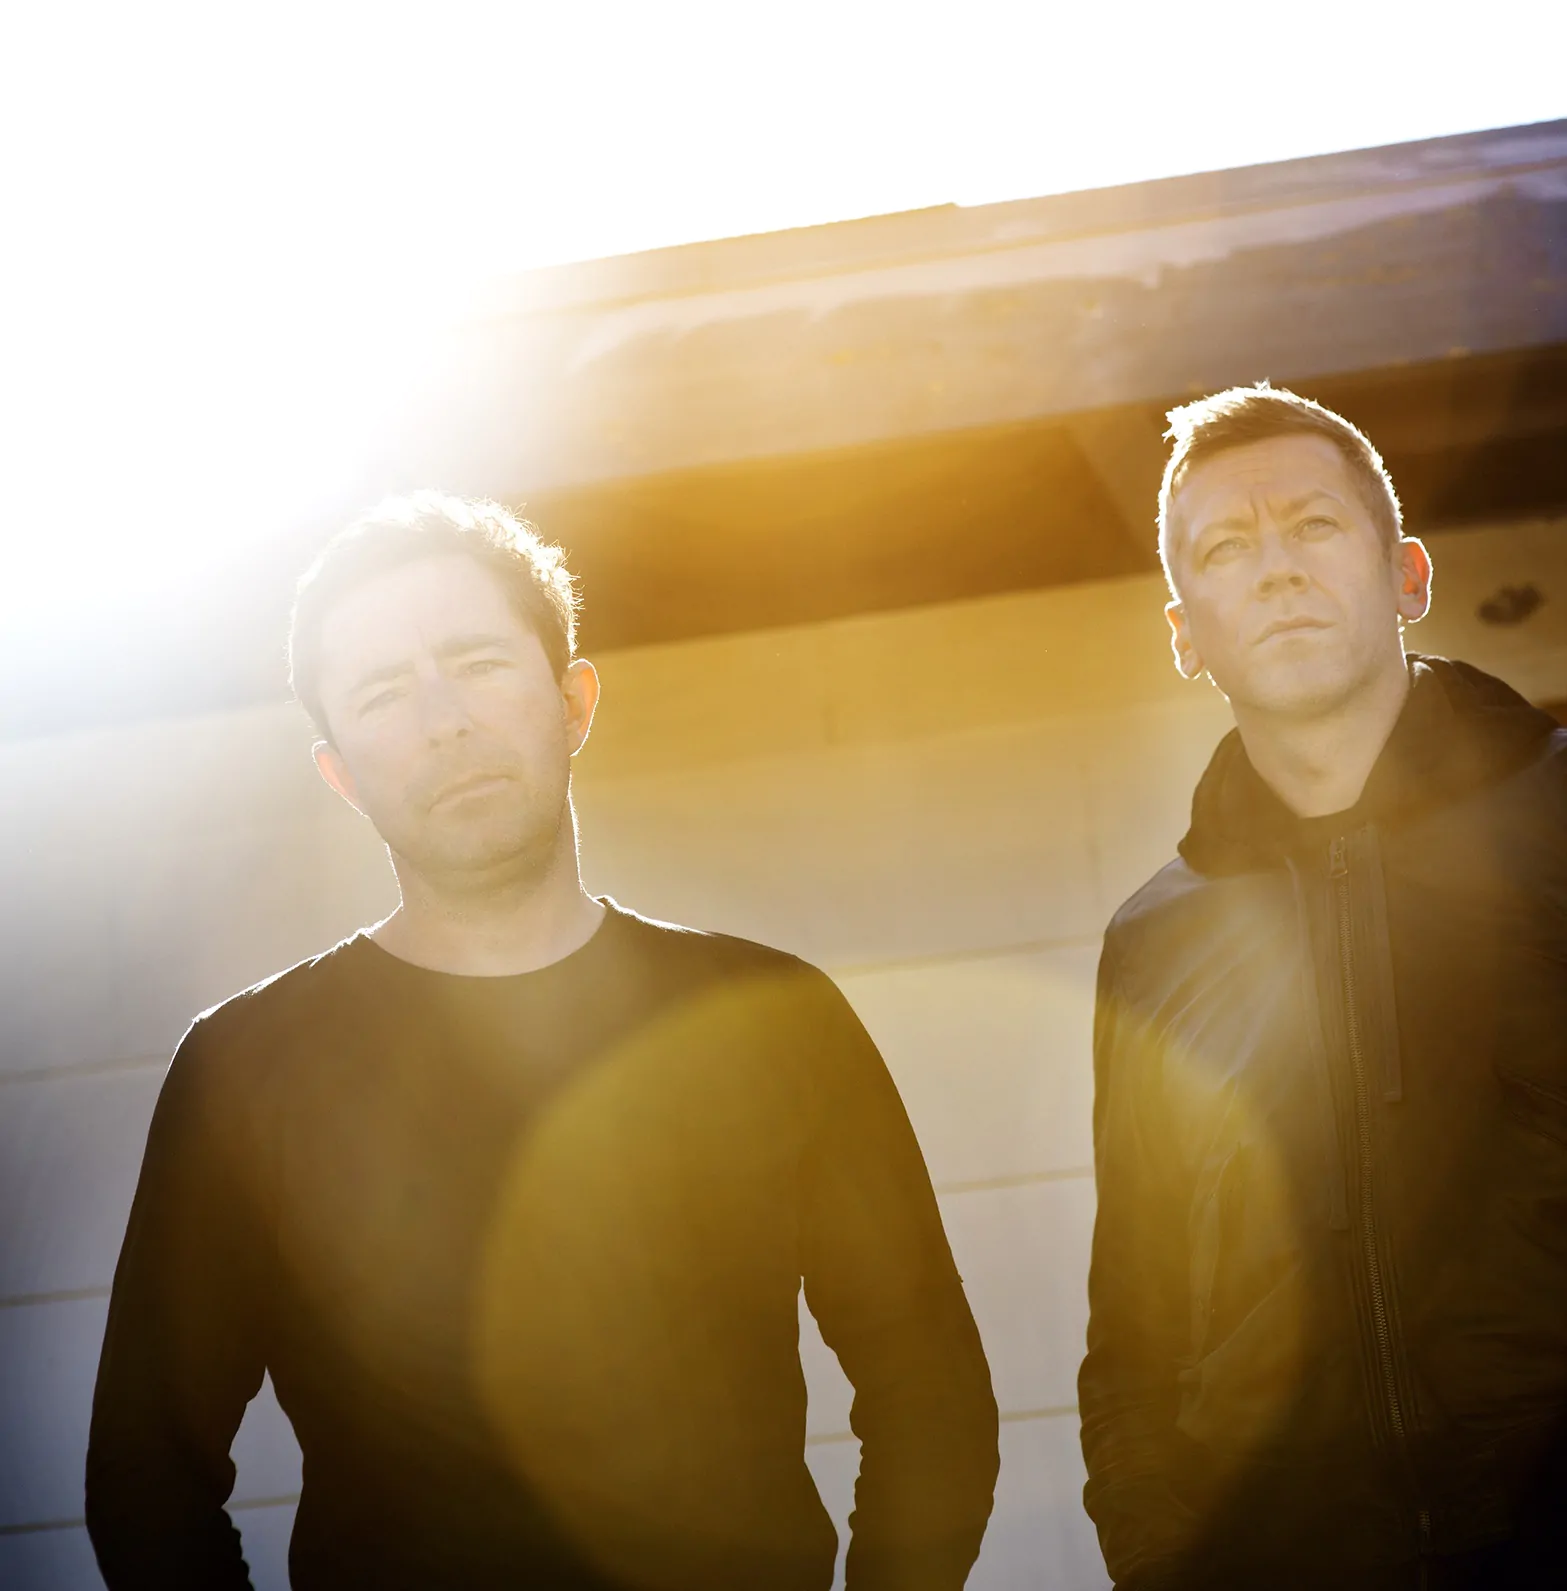 THE CINEMATIC ORCHESTRA announce ‘TO BELIEVE REMIXES’ out 6th March